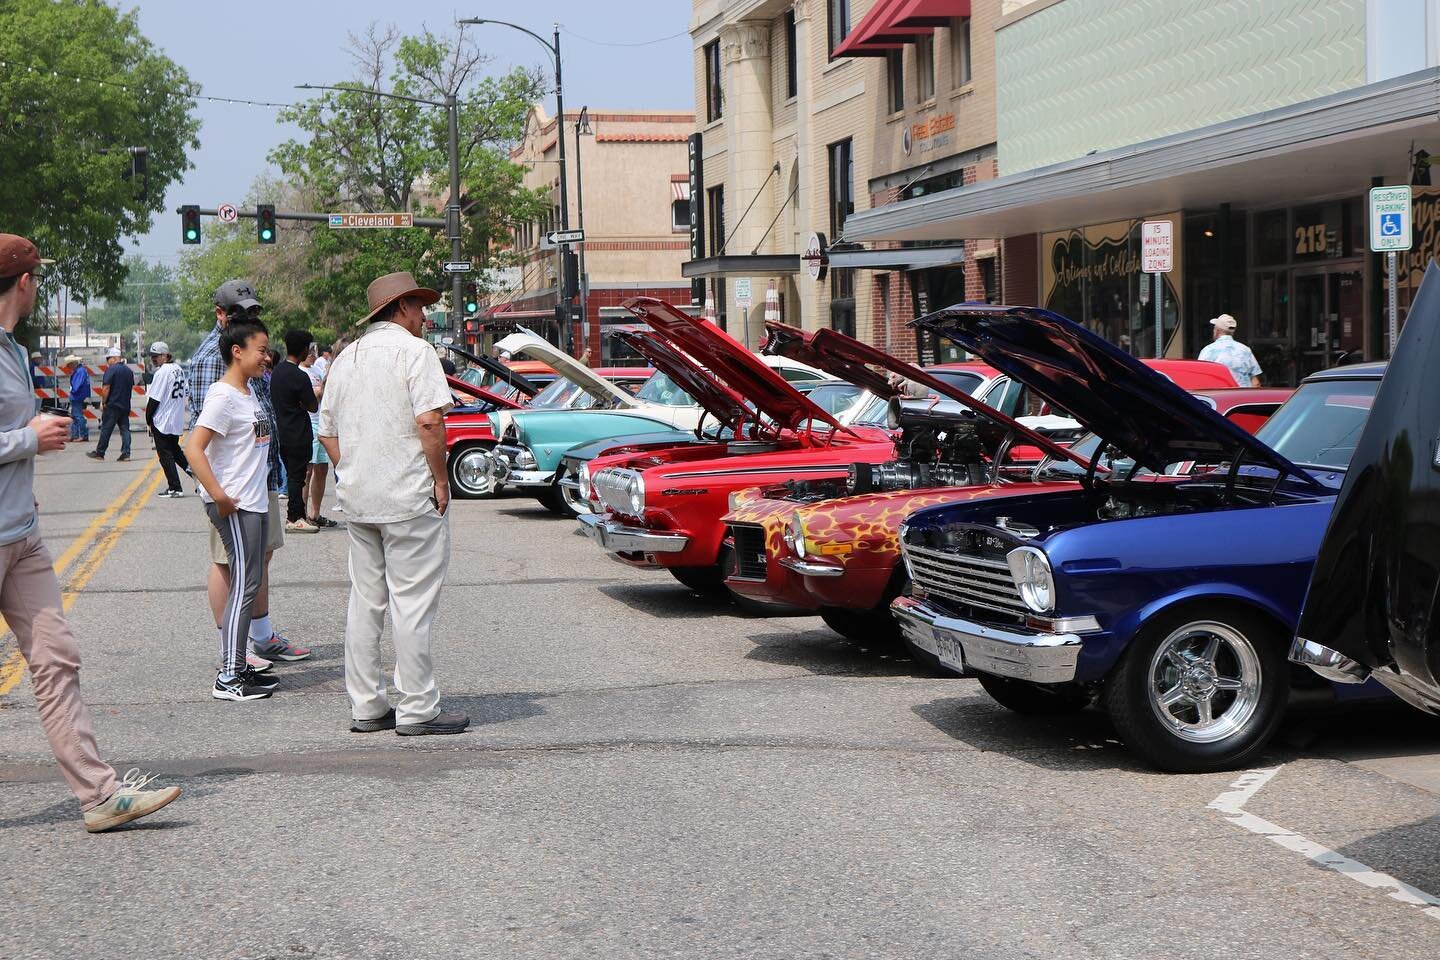 The Blues &amp; Cruise Car Show and Blues Music Festival is underway! We have vintage cars, live music, local craft beer and lots of food trucks! This event is free and open to the public until 7 PM on 3rd, 4th &amp; 5th Street! 🚗🍻🍕🎶